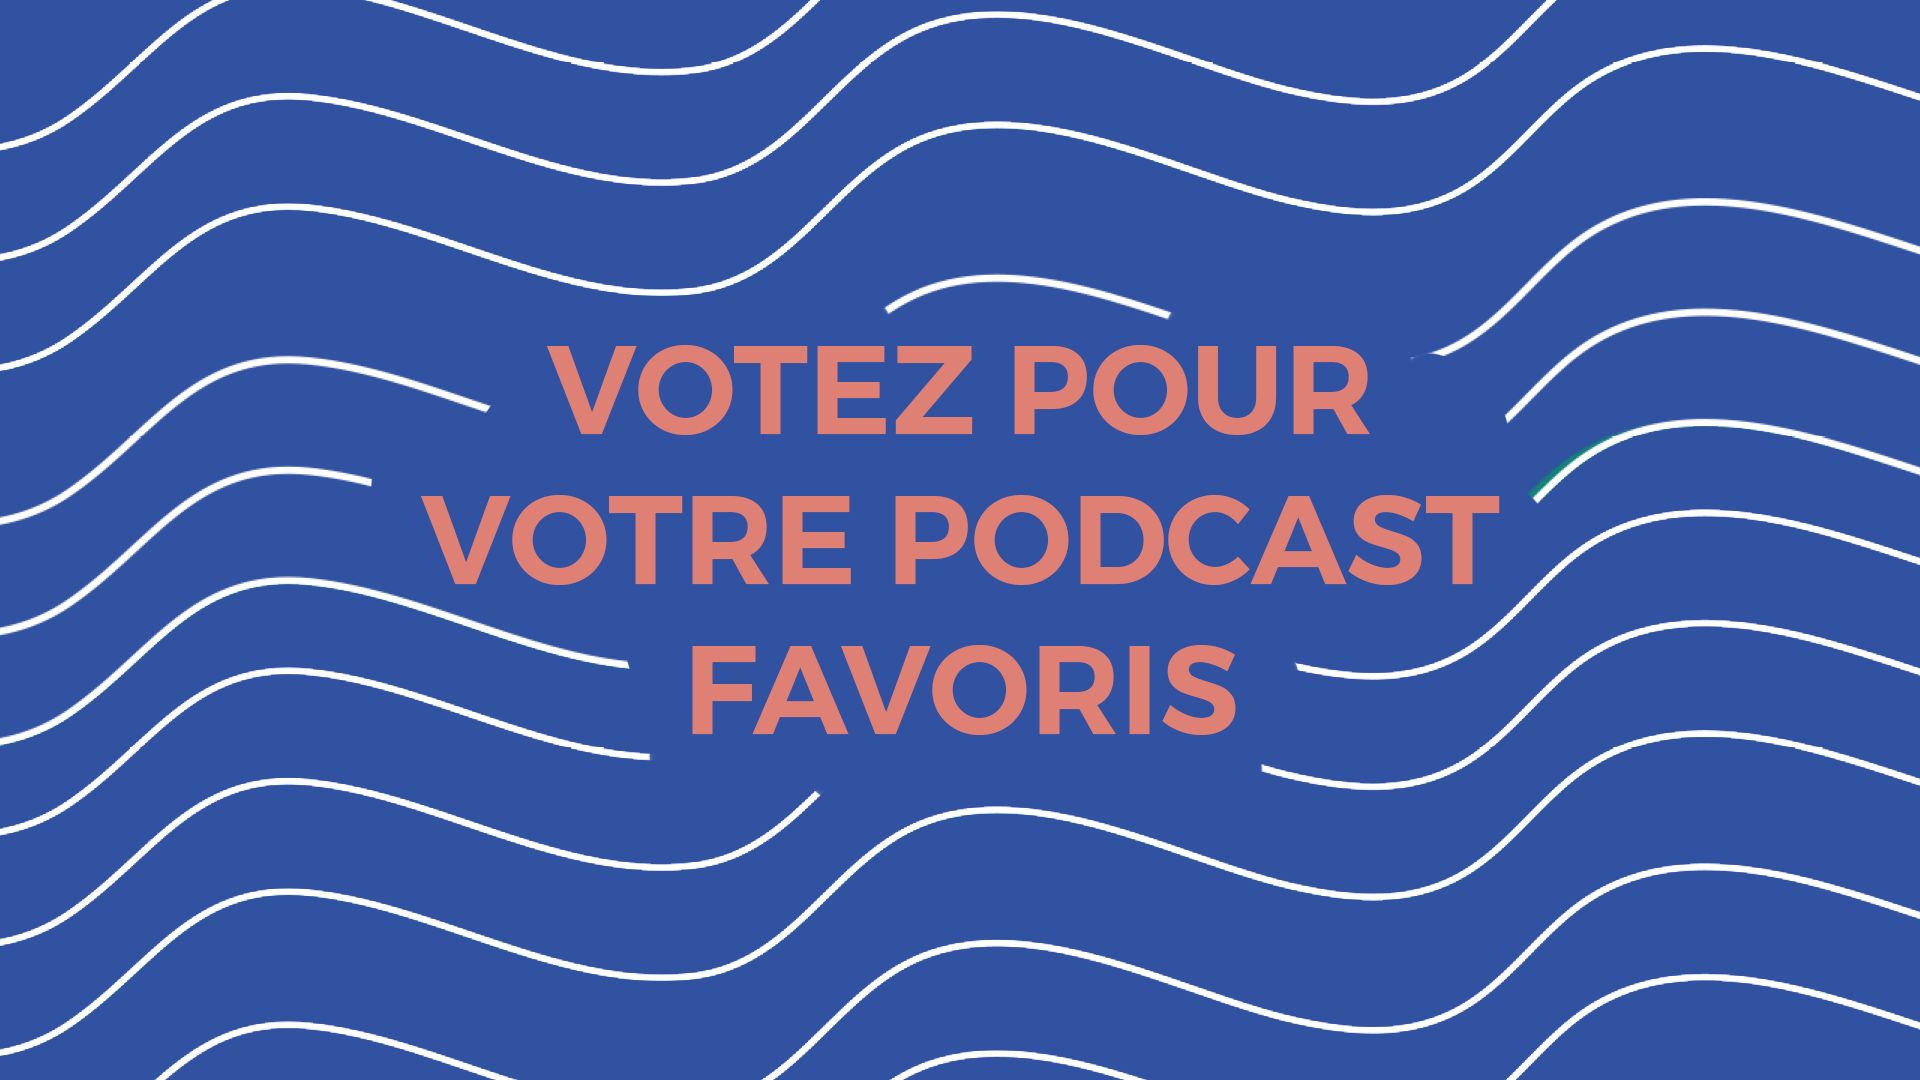 brussels-podcast-festival-3-selections-pour-les-podcasts-rtbf